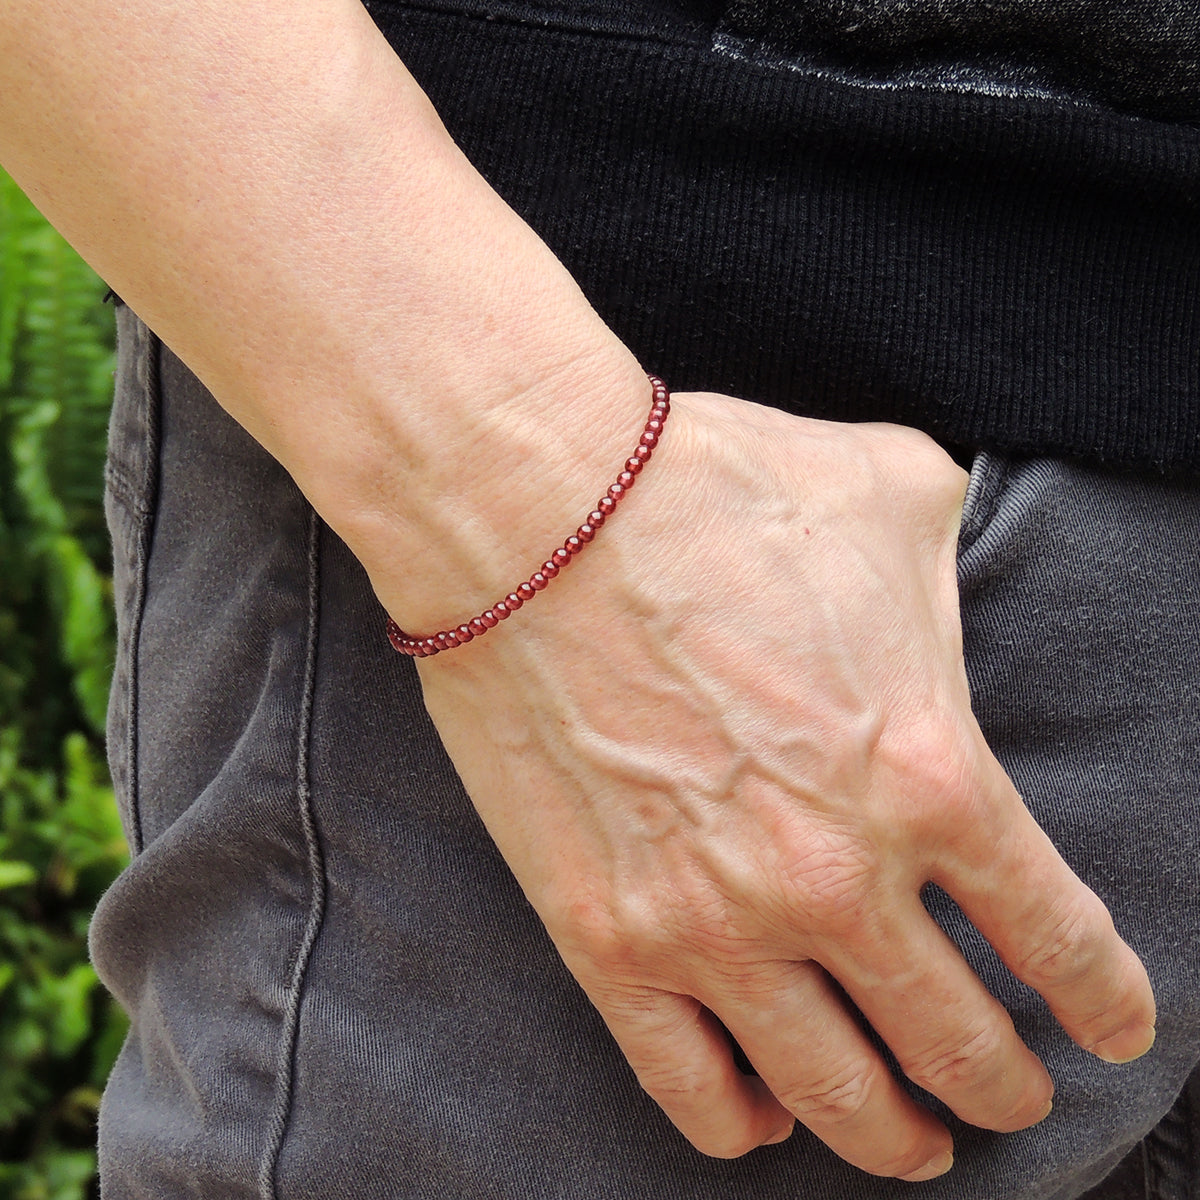 Crafted with care, this bracelet features natural, high-quality 3.5mm garnet beads, totaling 46 beads in all.